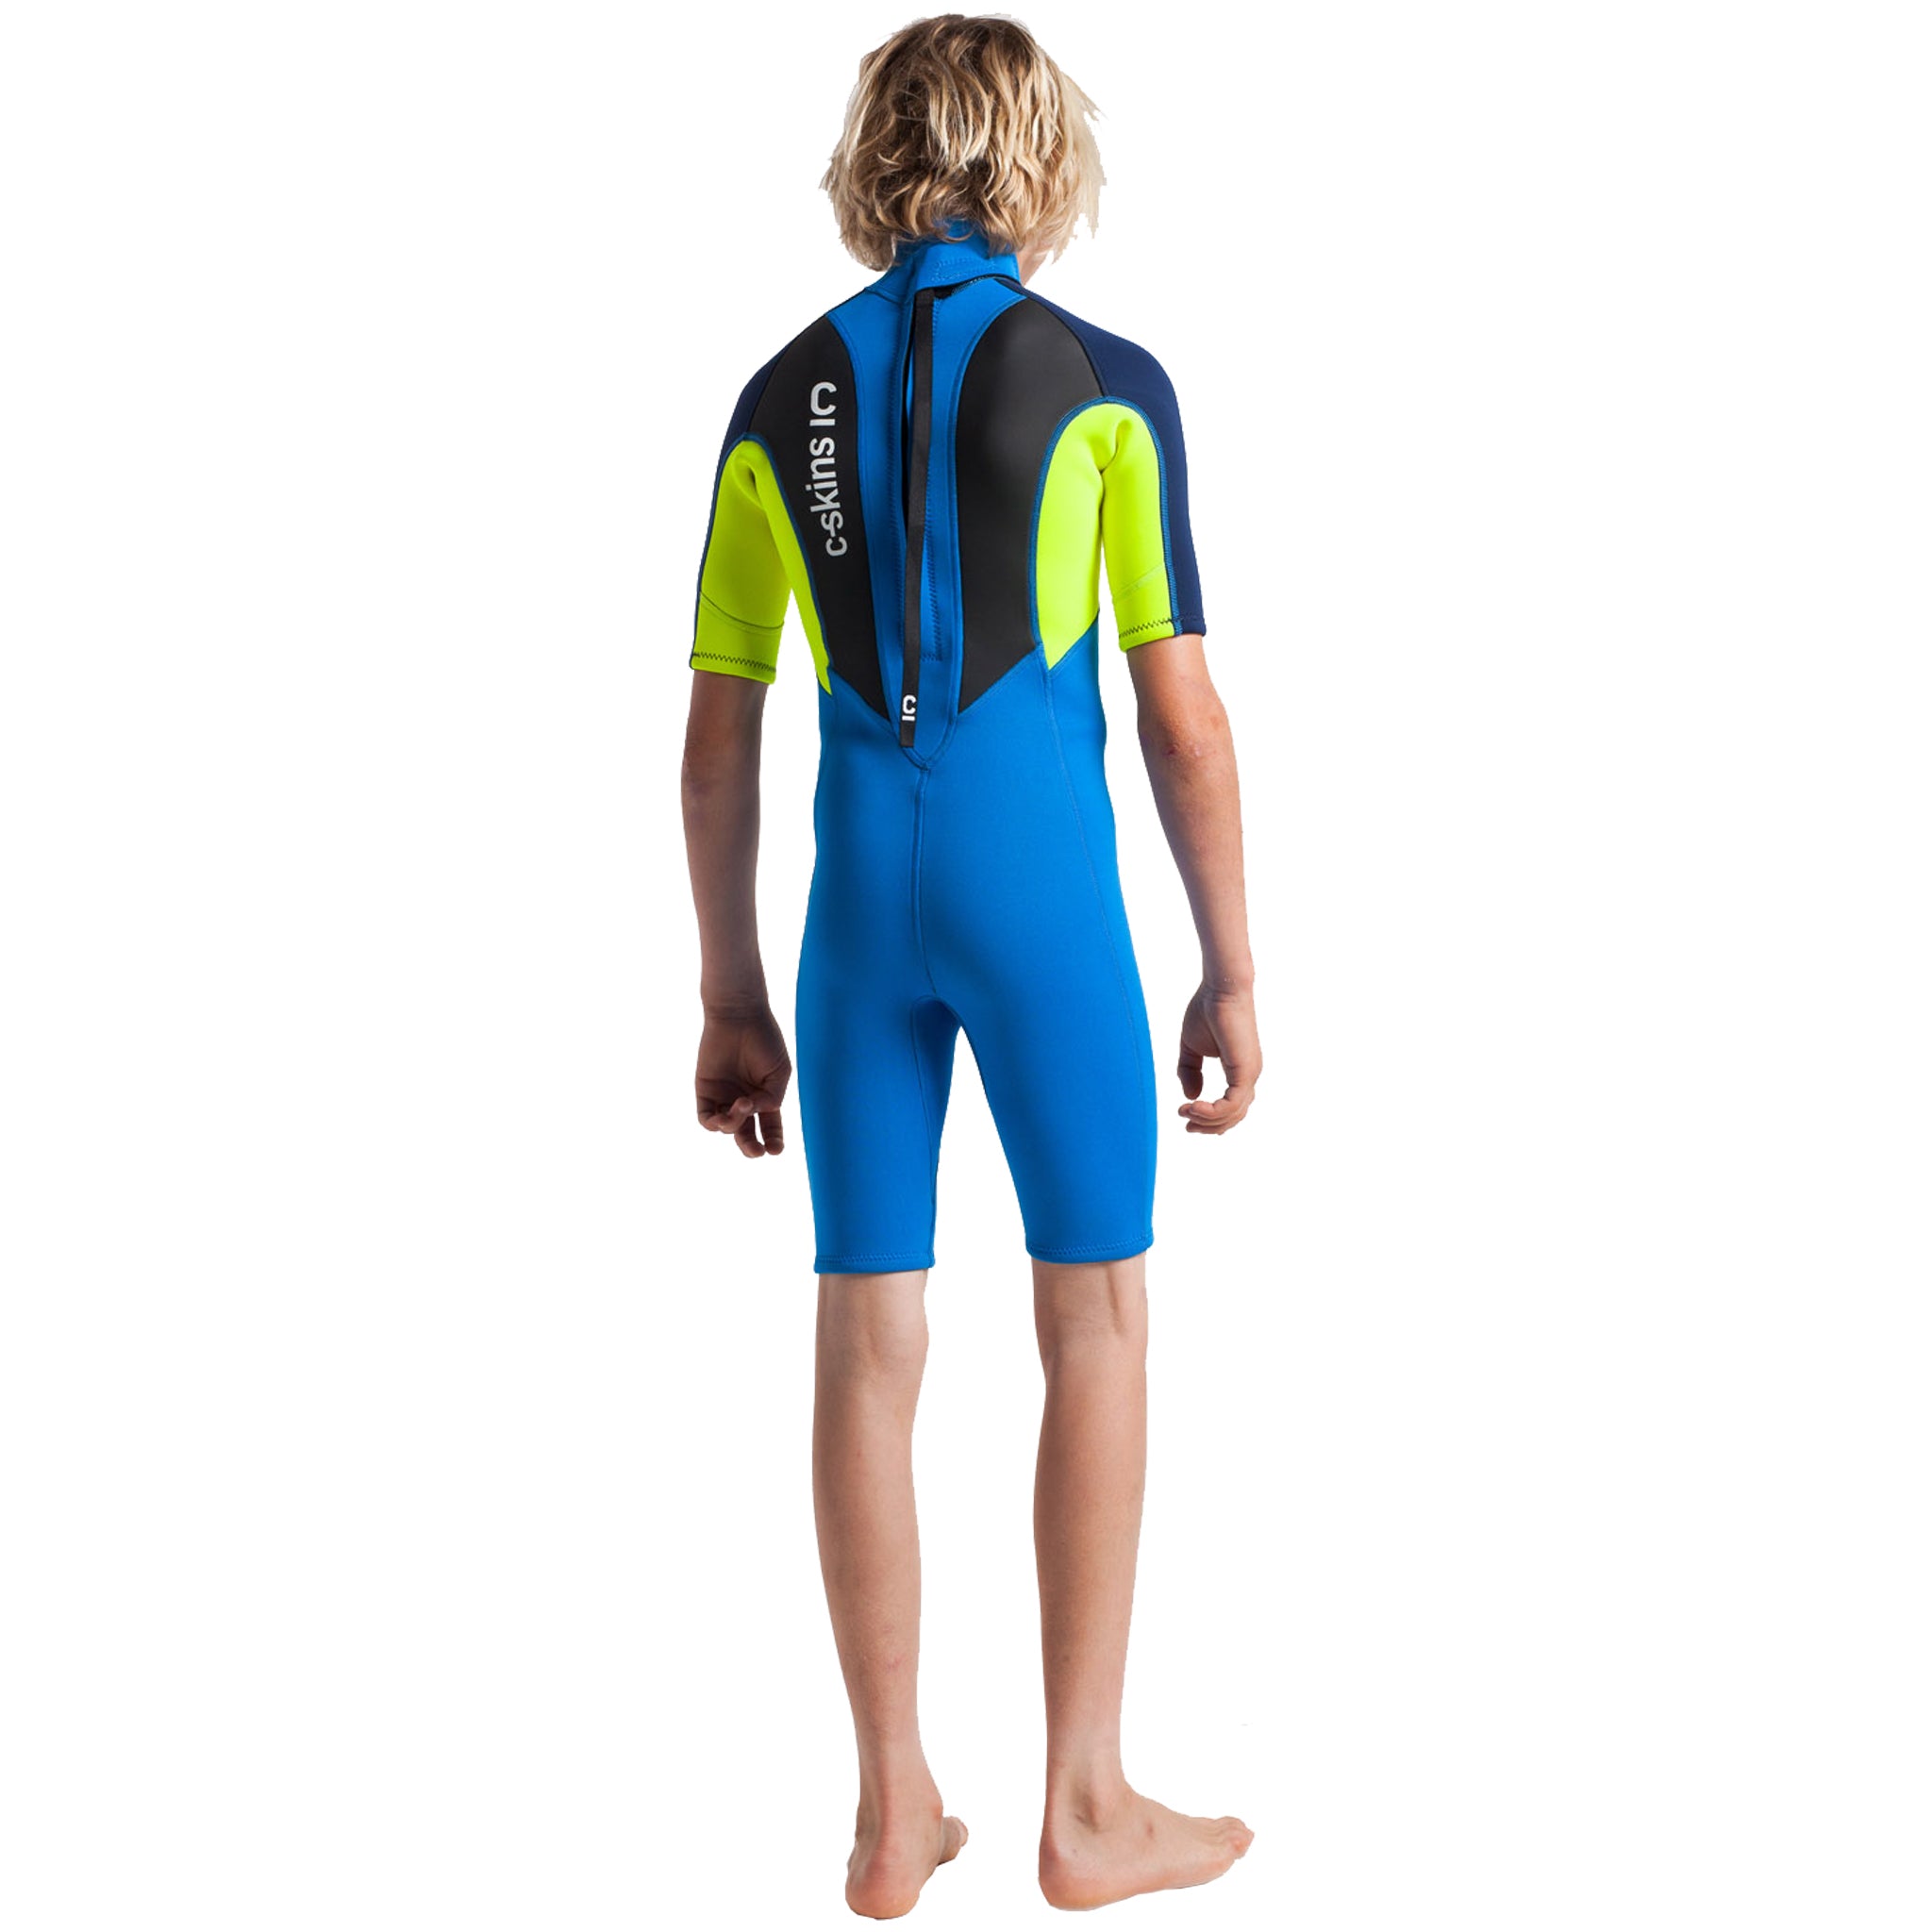 C-Skins Element Junior Boys and Girls 3/2mm Shortie Wetsuit | Cyan Yellow Navy - Back